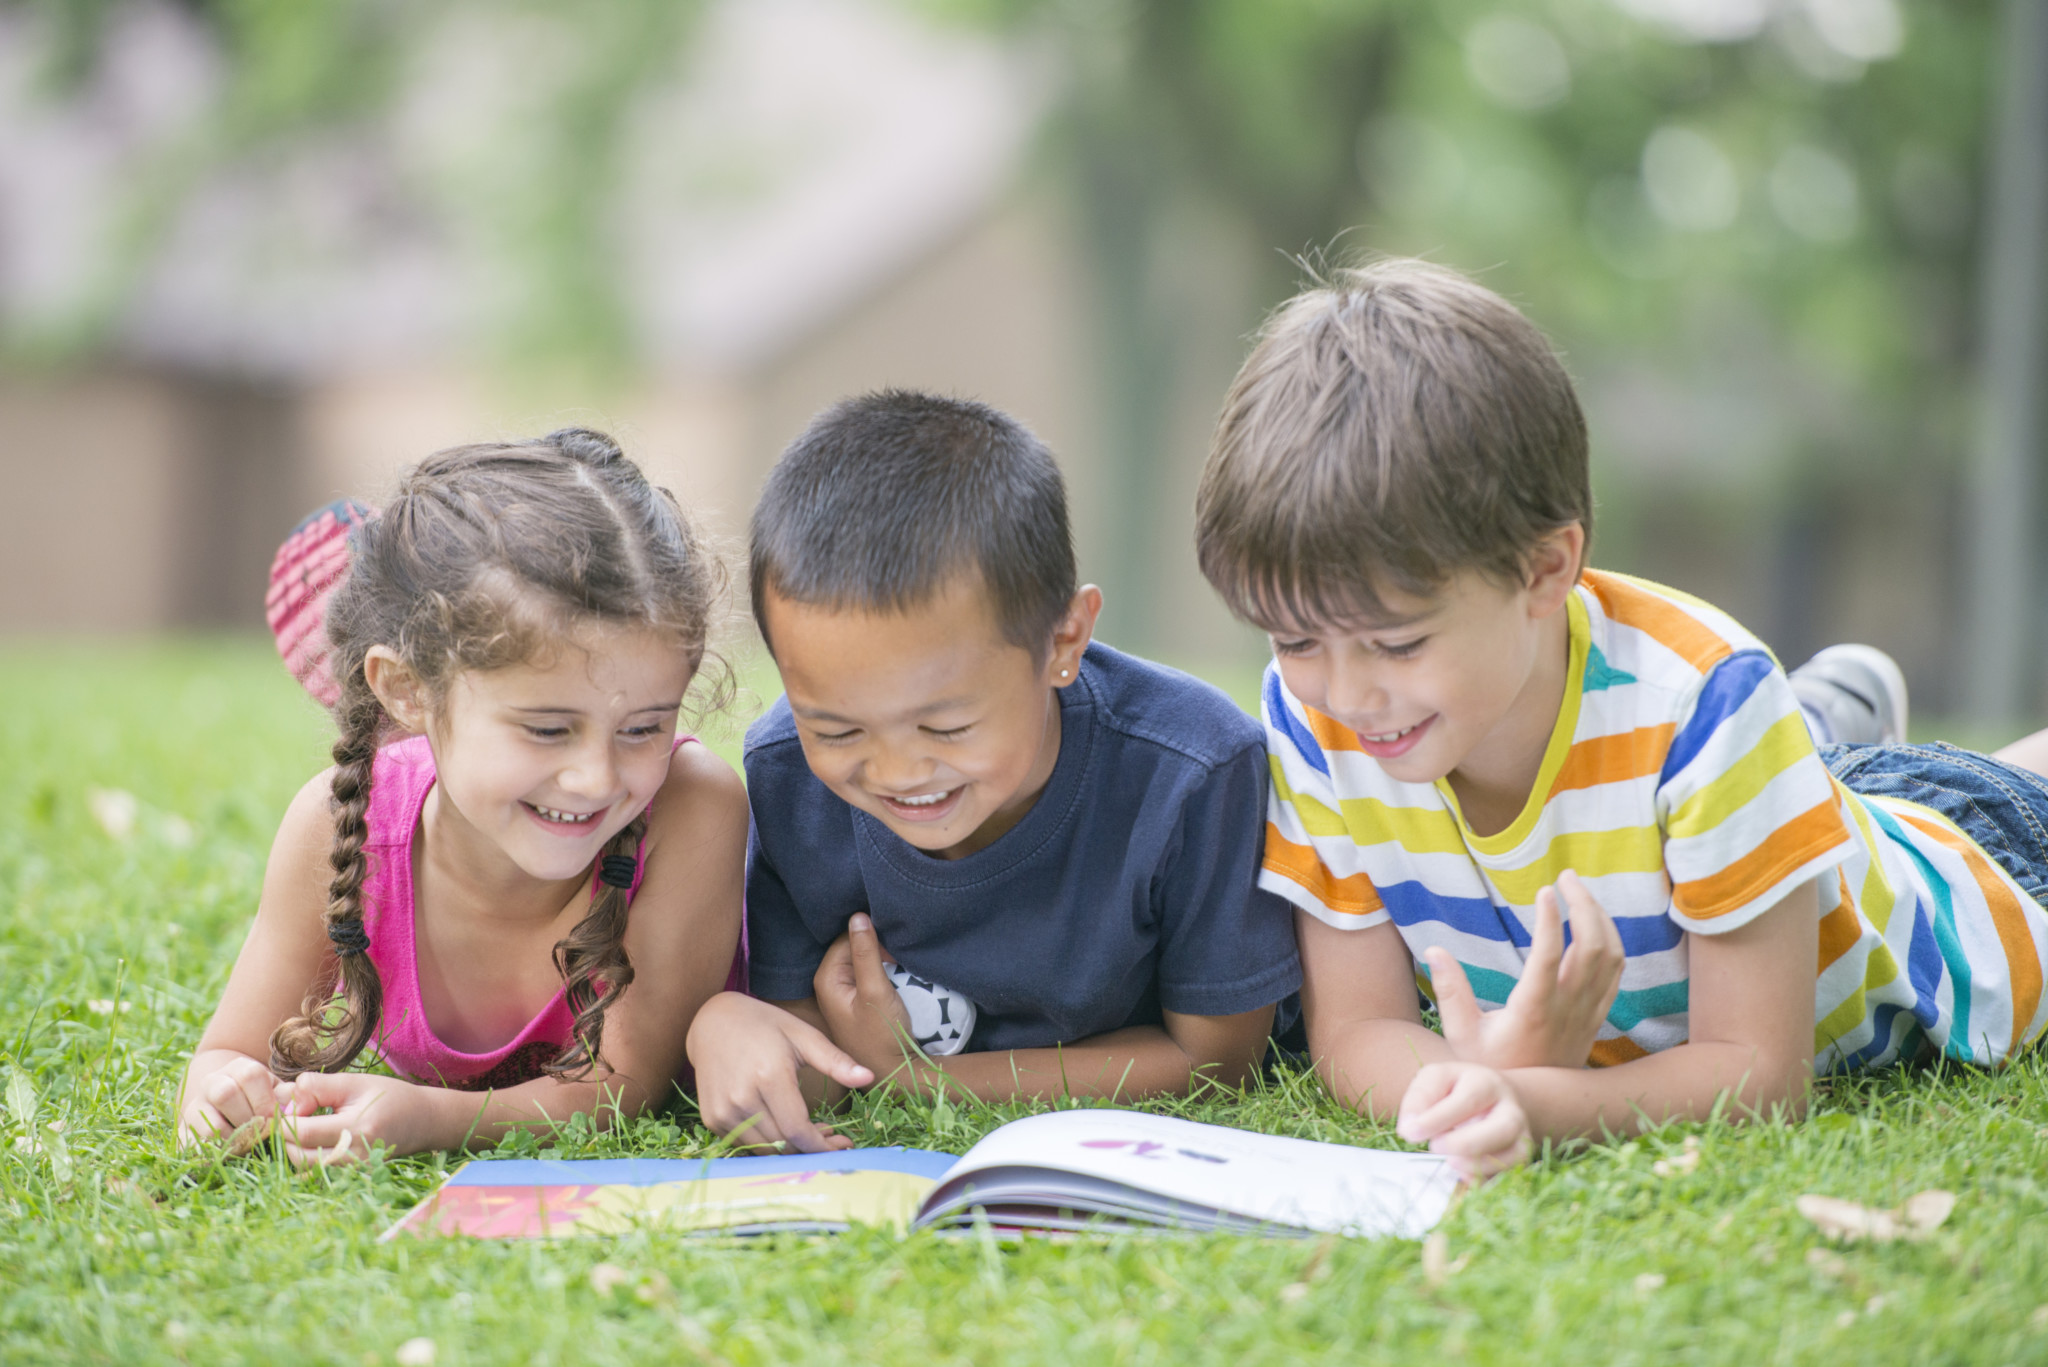 A multi-ethnic group of elementary age children are lying in the grass and are reading a book together in the grass.